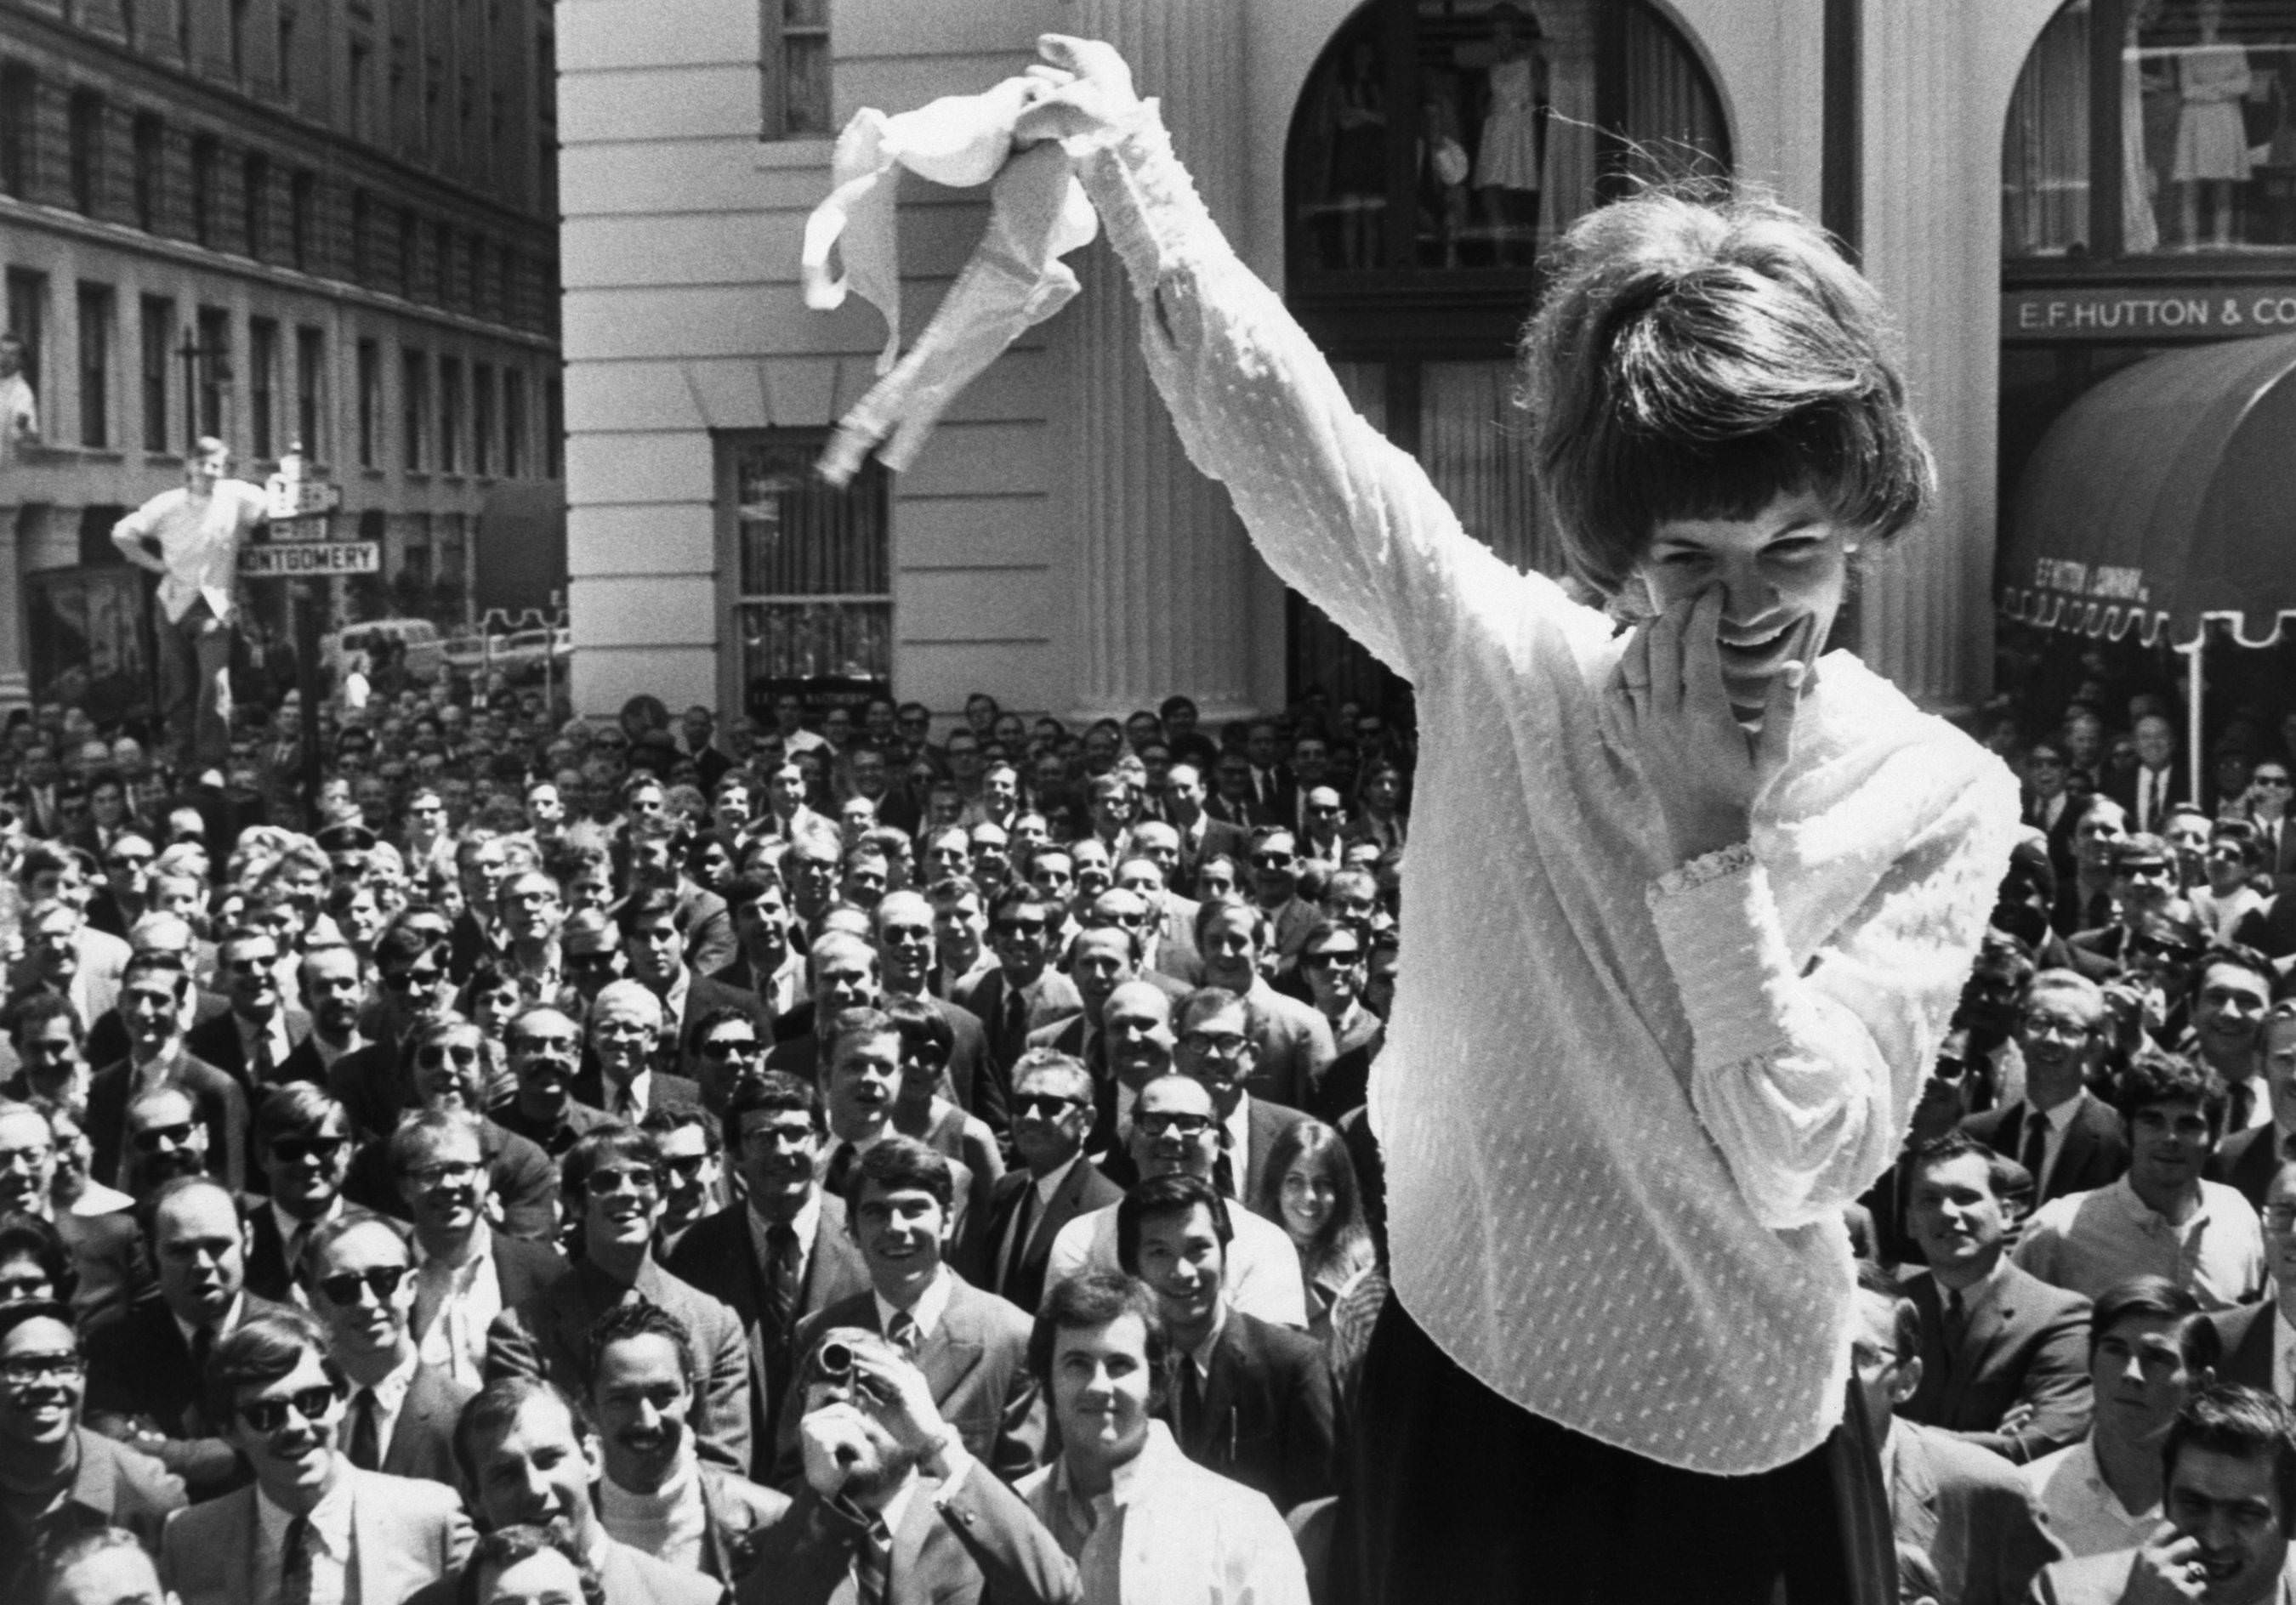 A woman removes her bra to the joy of the crowd outside a department store in San Fransisco, US in 1969. During the late 1960s and early 1970s, a number of different movements existed in the US. The anti-Vietnam movement, the Civil Rights Movement, and the Womens movement were the bigger ones. The last 2 pushed for equality in a country run predominantly by white males at the time. One of the staples of the womens movement at the time was removing their bras and on occasion, burning them. This was a sign of a womans liberation from the stigma of just being an object of affection.